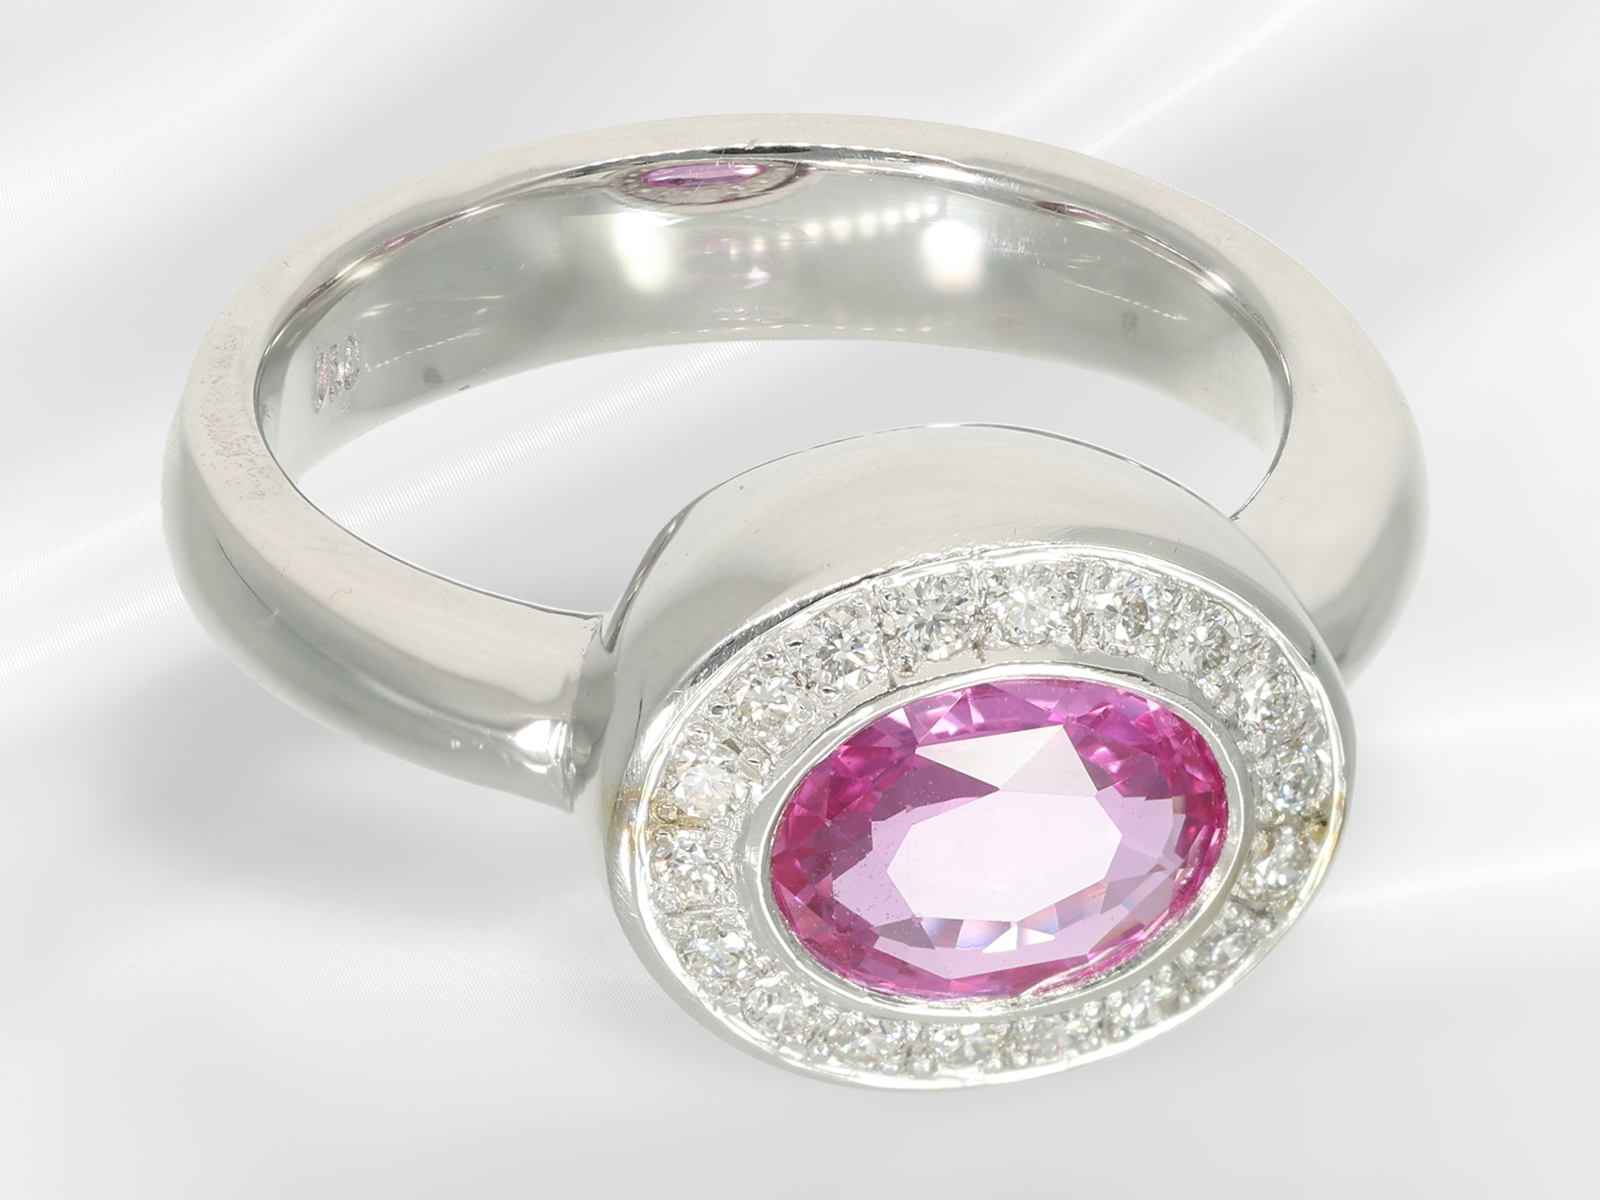 High-quality and unworn gold jewellery ring with brilliant-cut diamond/ruby setting, beautiful ruby  - Image 6 of 6